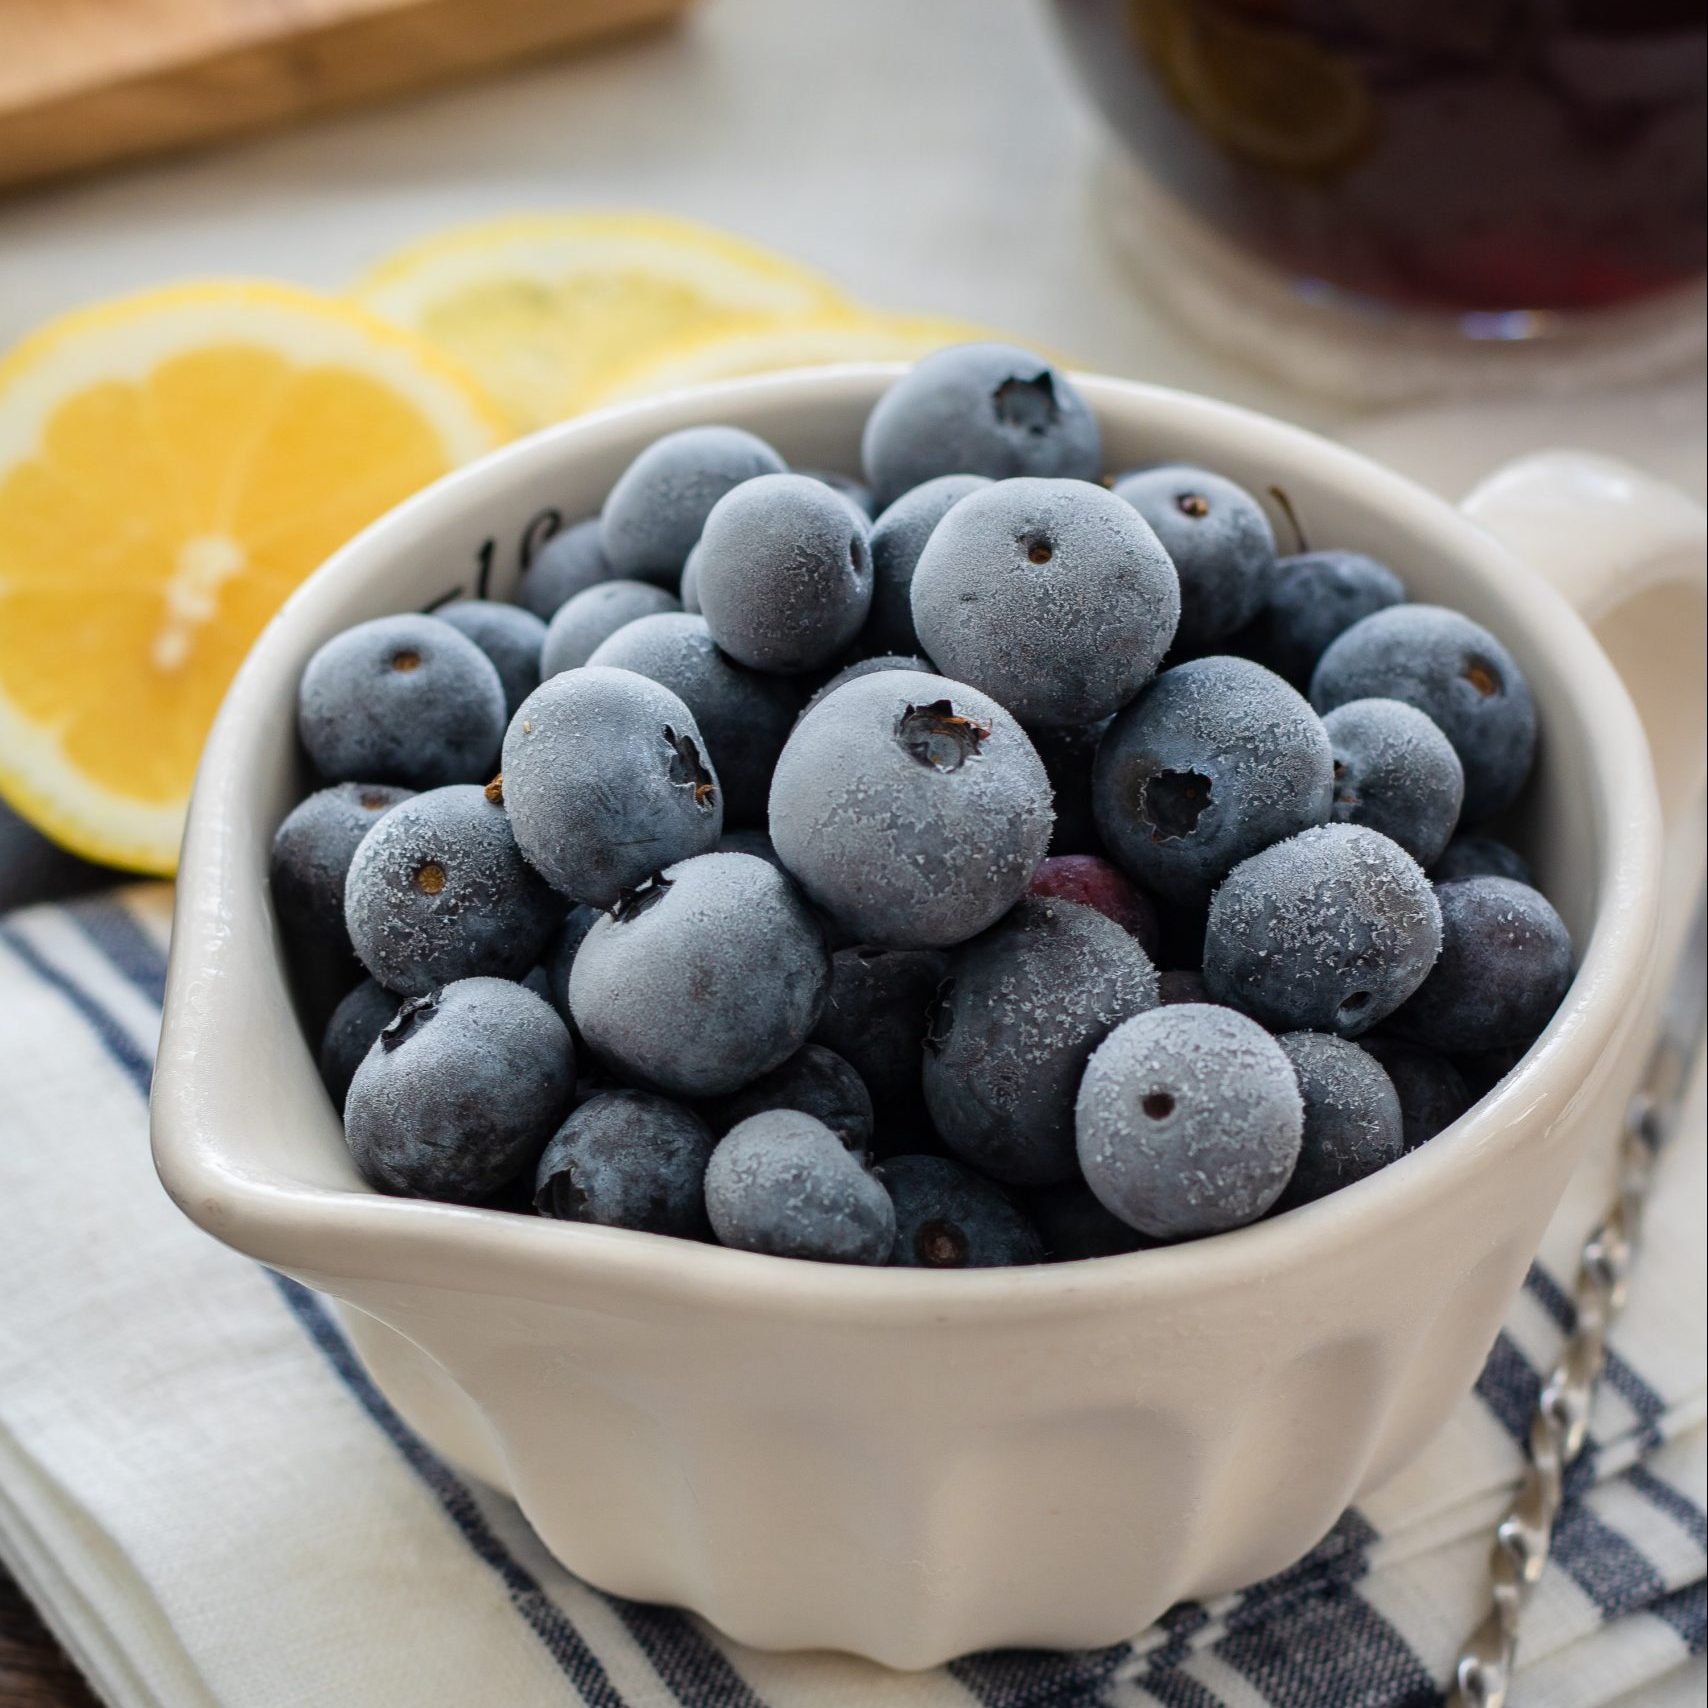 freeze produce with blueberries in a white bowl with lemon slices on the side